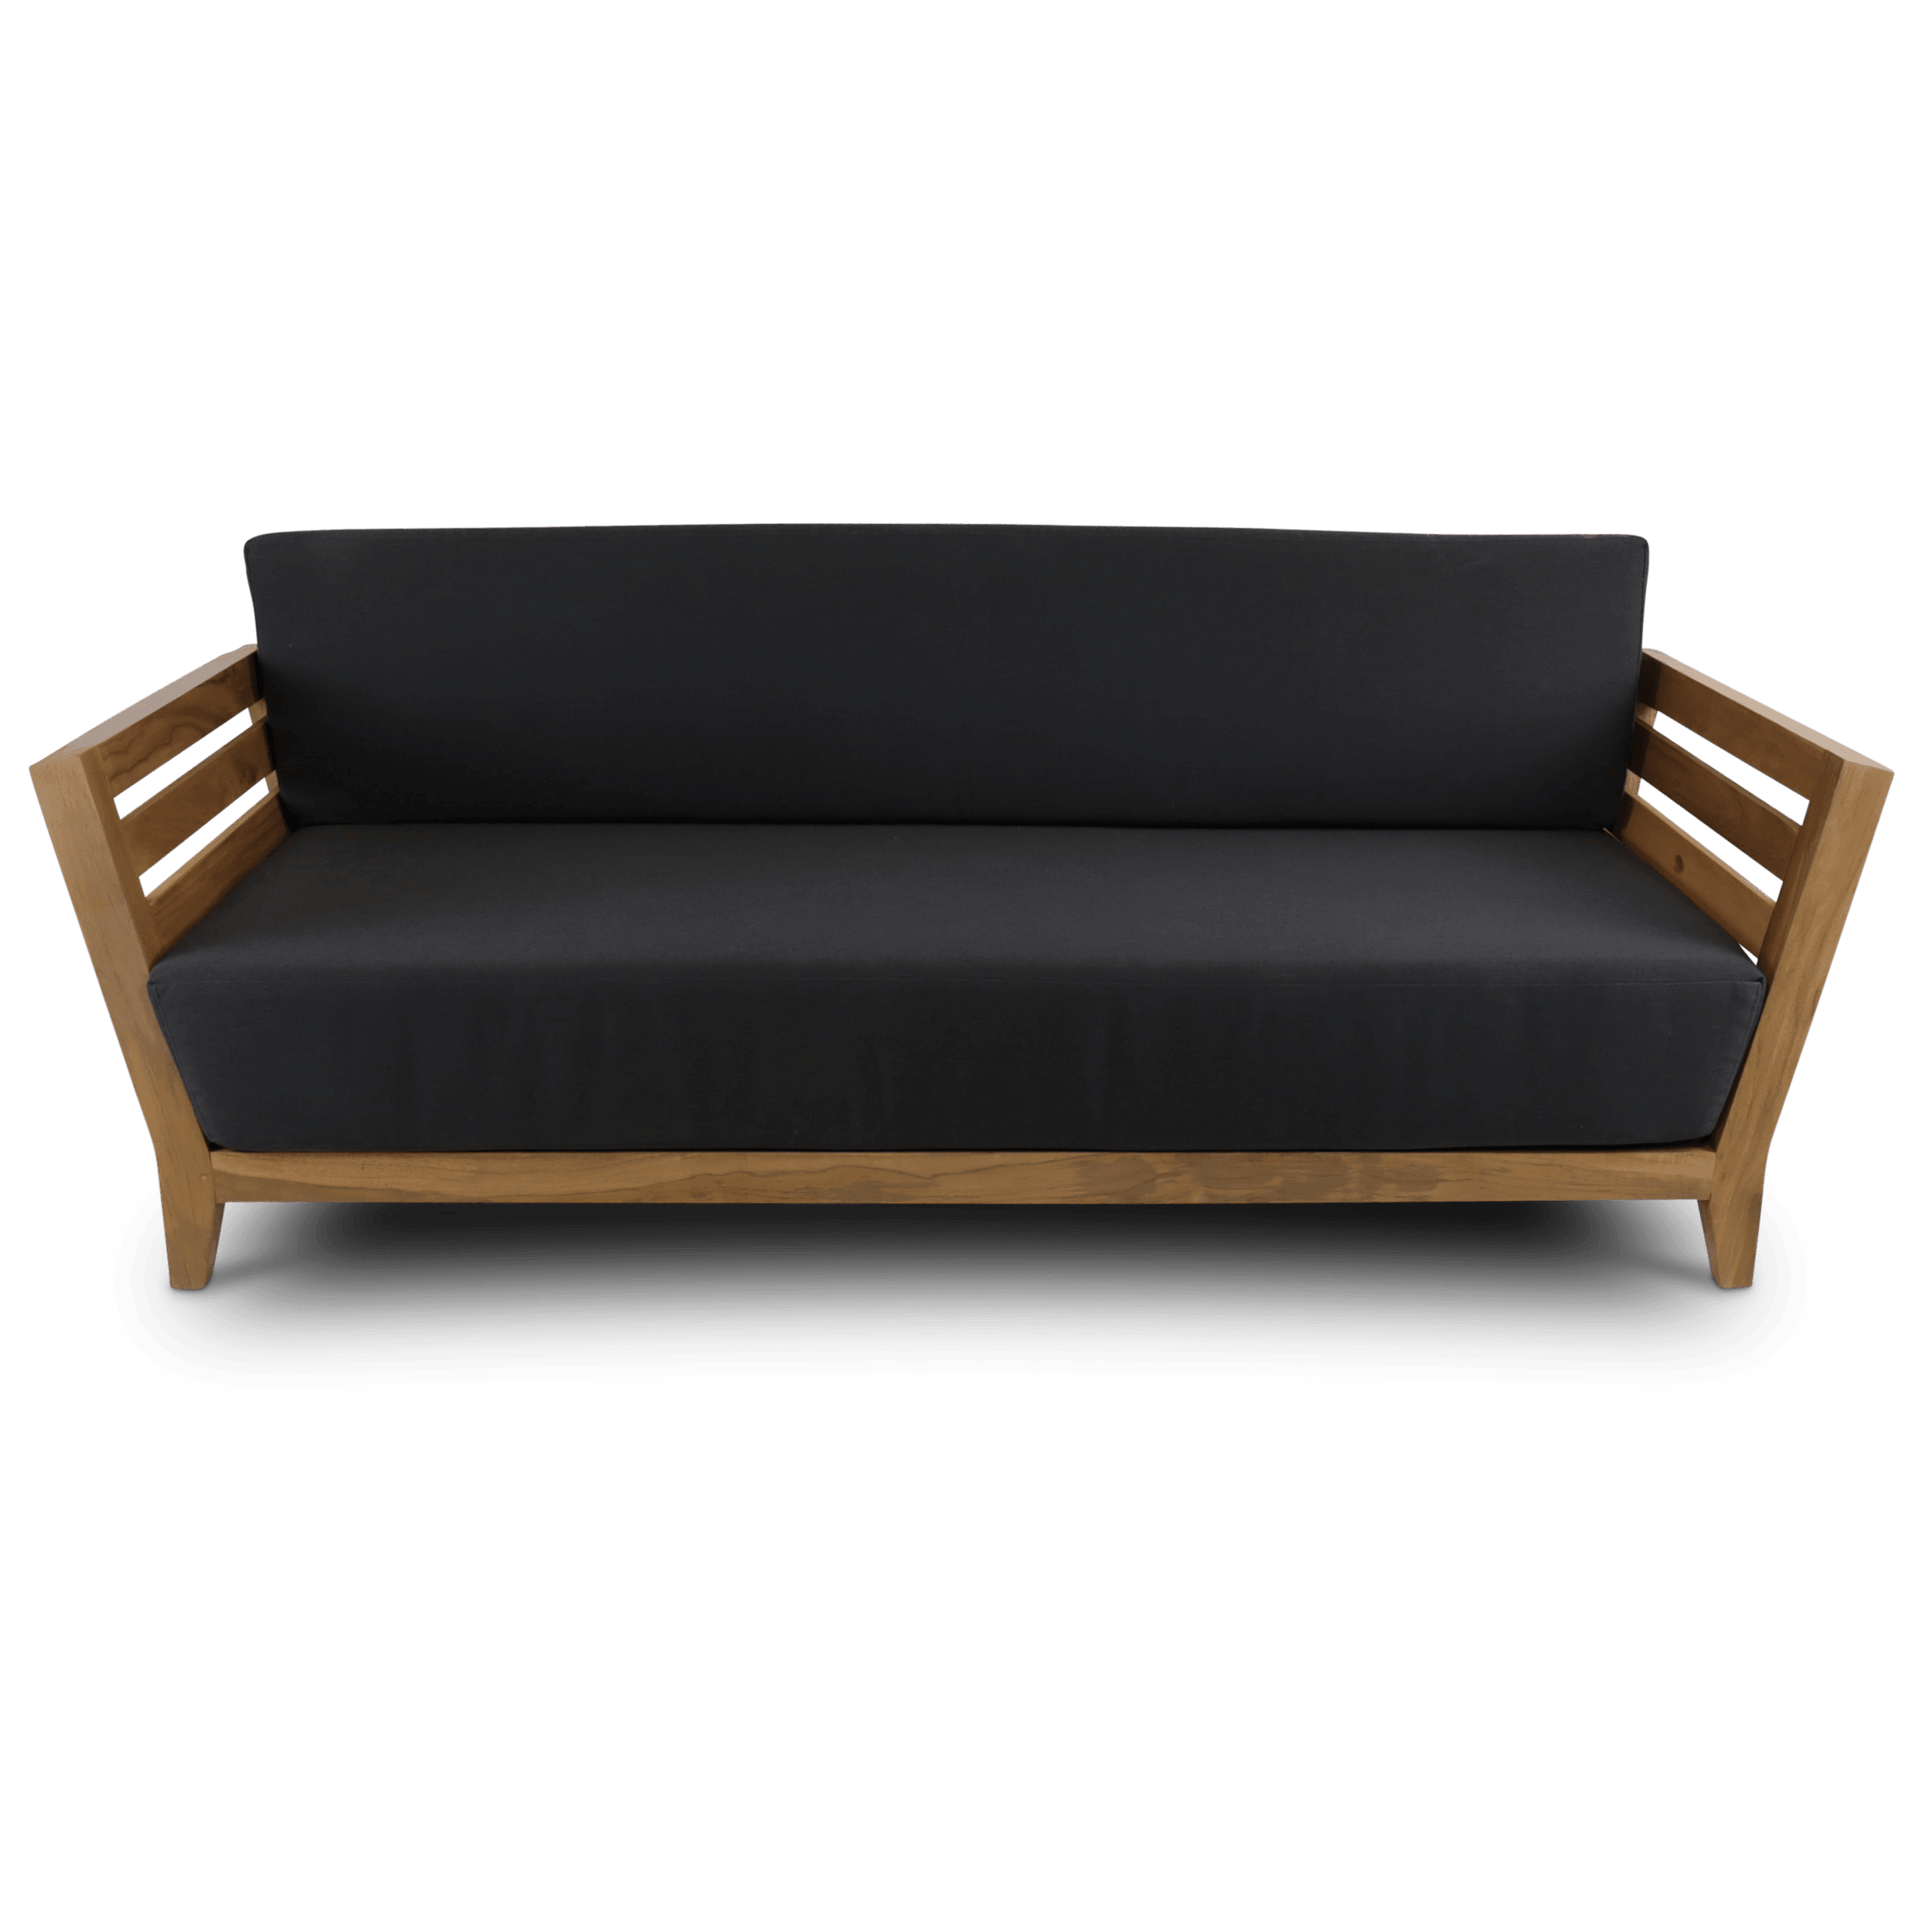 Daintree 3 Seater in Premium Natural Teak and Midnight Sunproof All Weather Fabric - The Furniture Shack